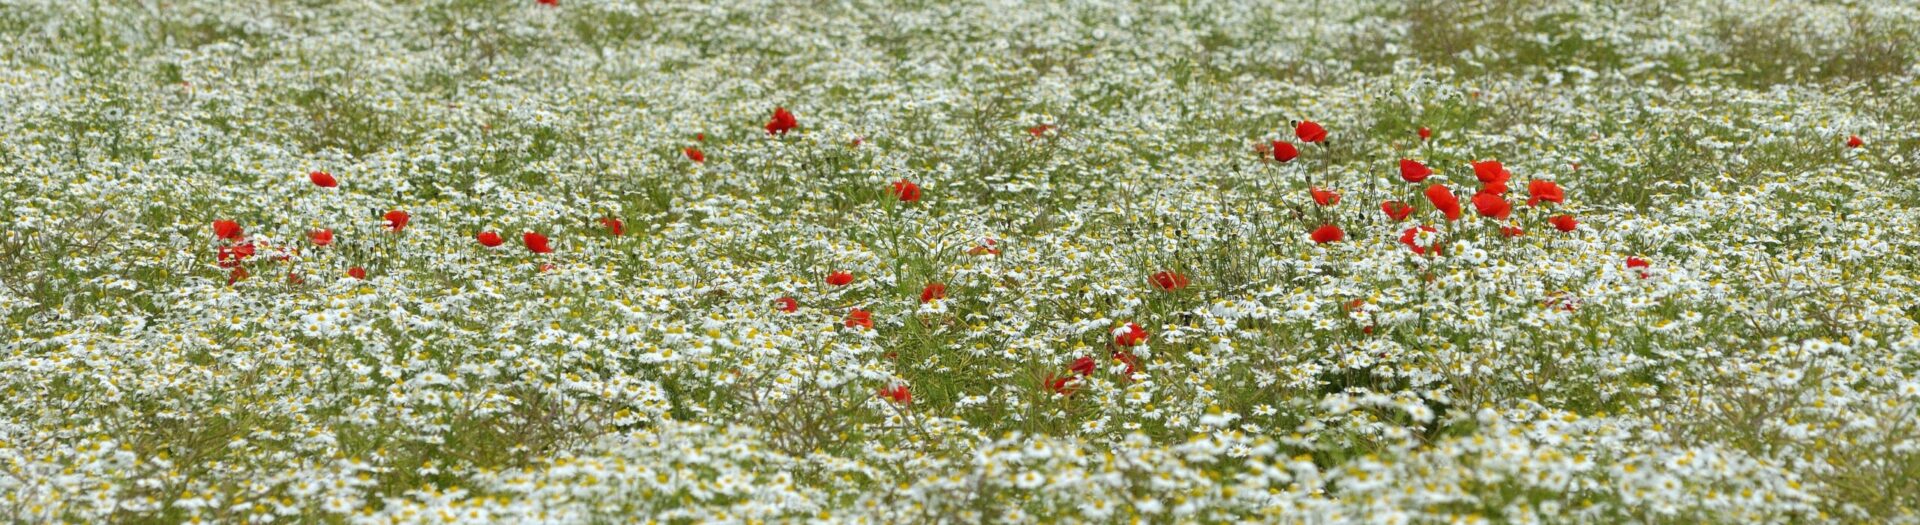 Field with white flowers